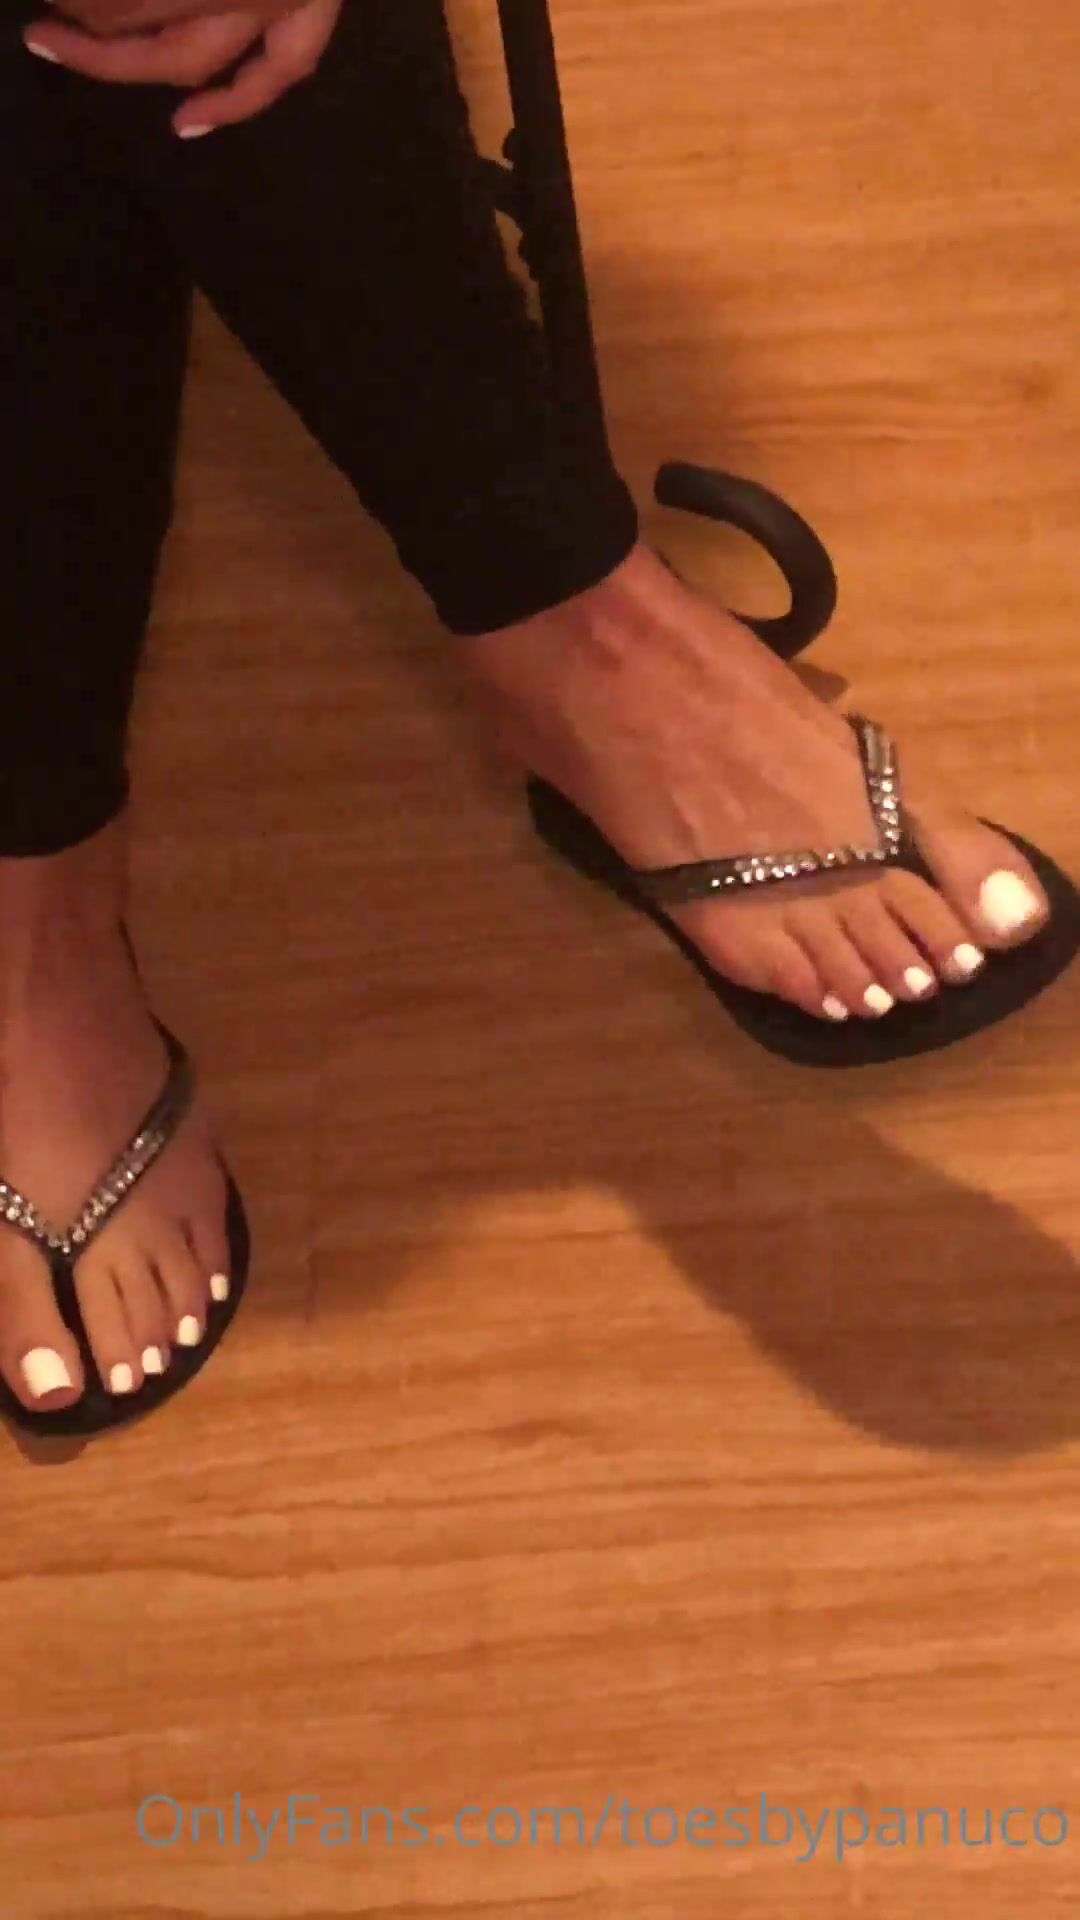 Tbp_special White Toes Foot Dangle xxx onlyfans porn